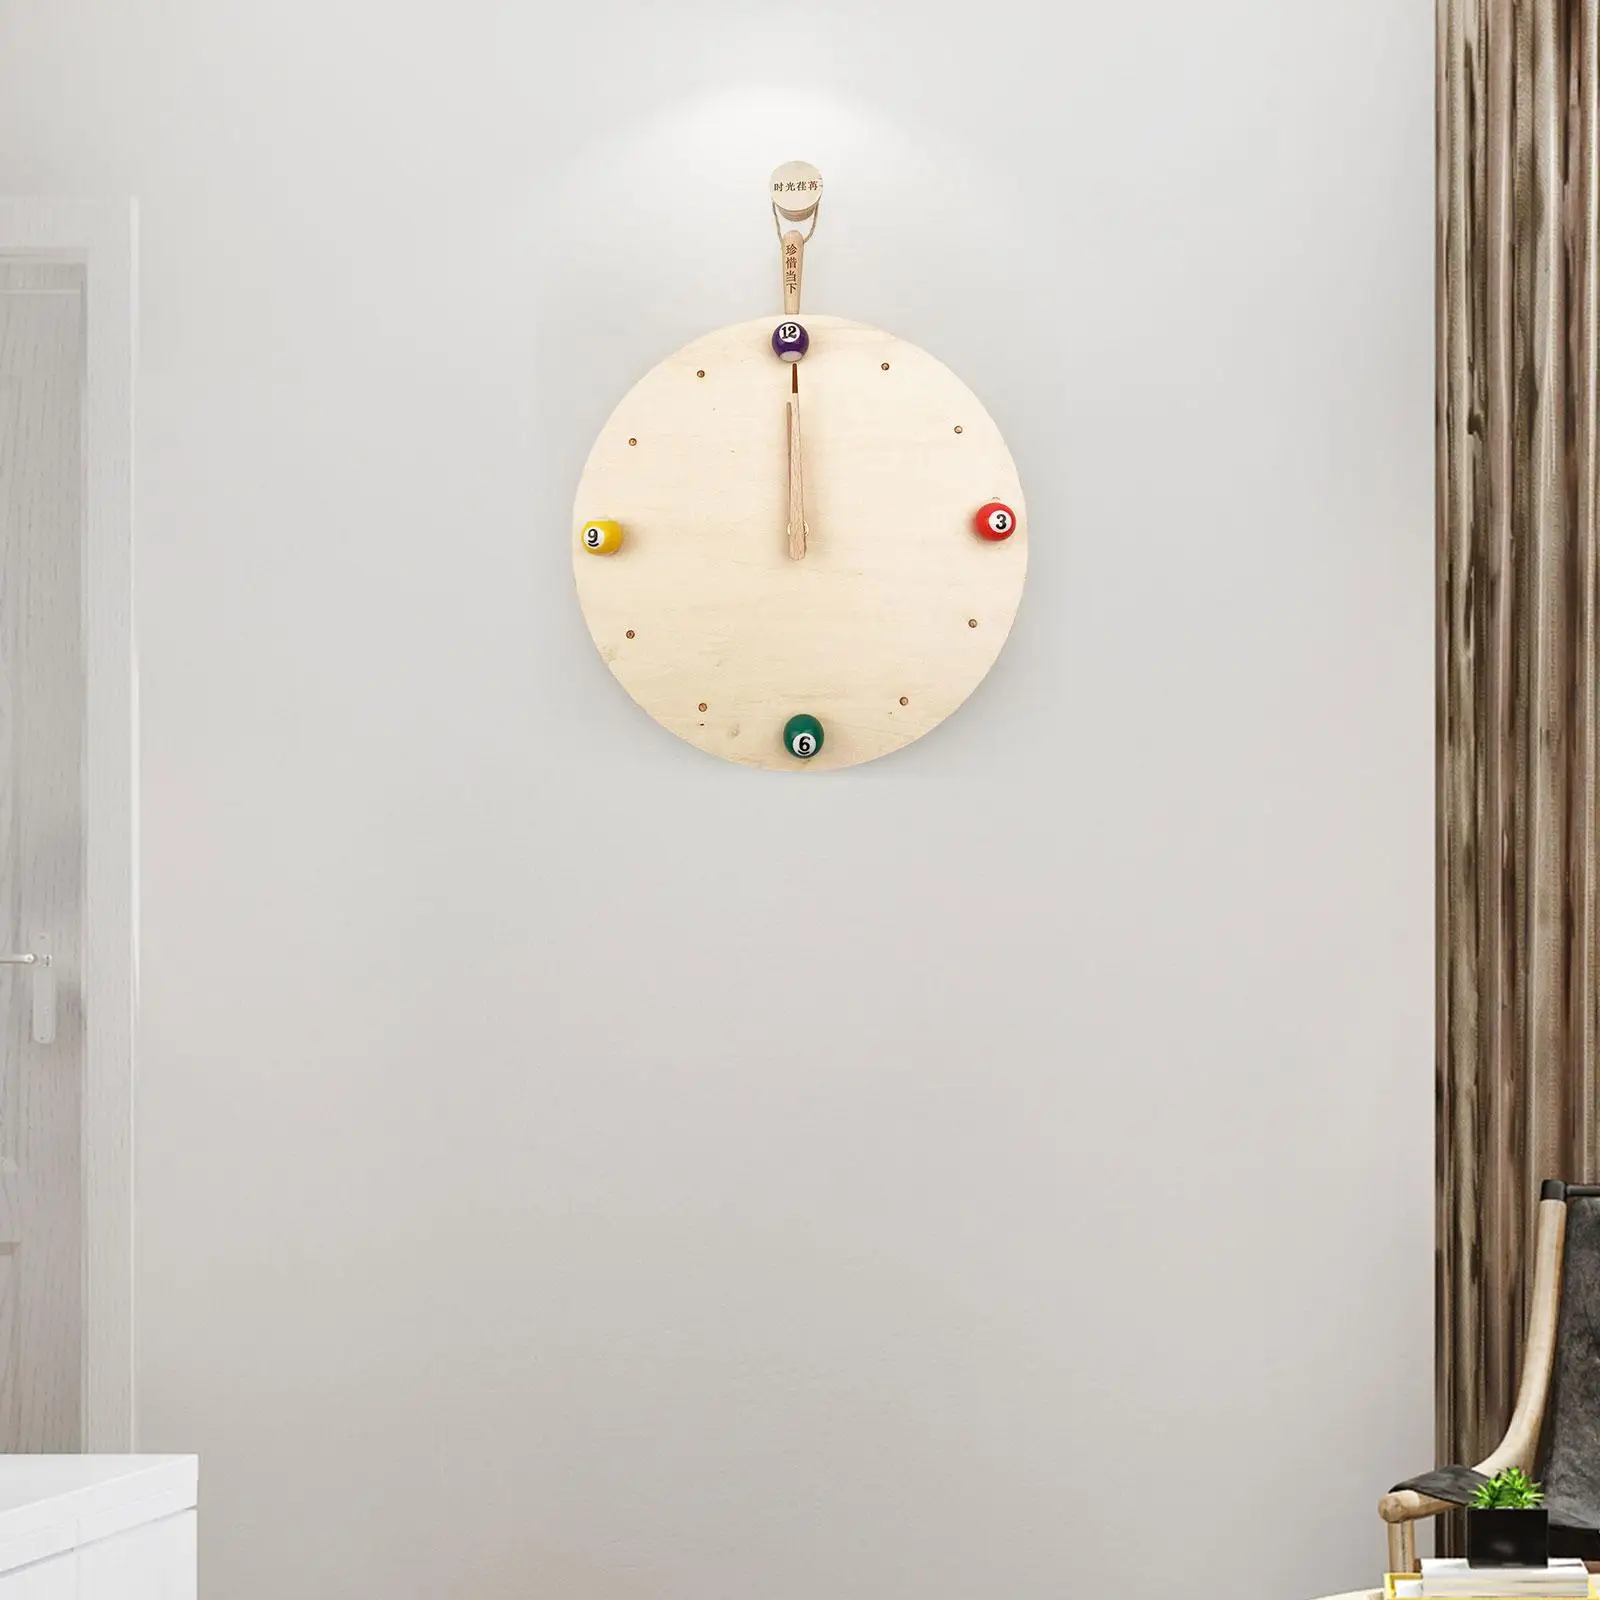 Pool Ball Wall Clock Round Big Wall Clock for Pool Room, Game Room, Kitchen